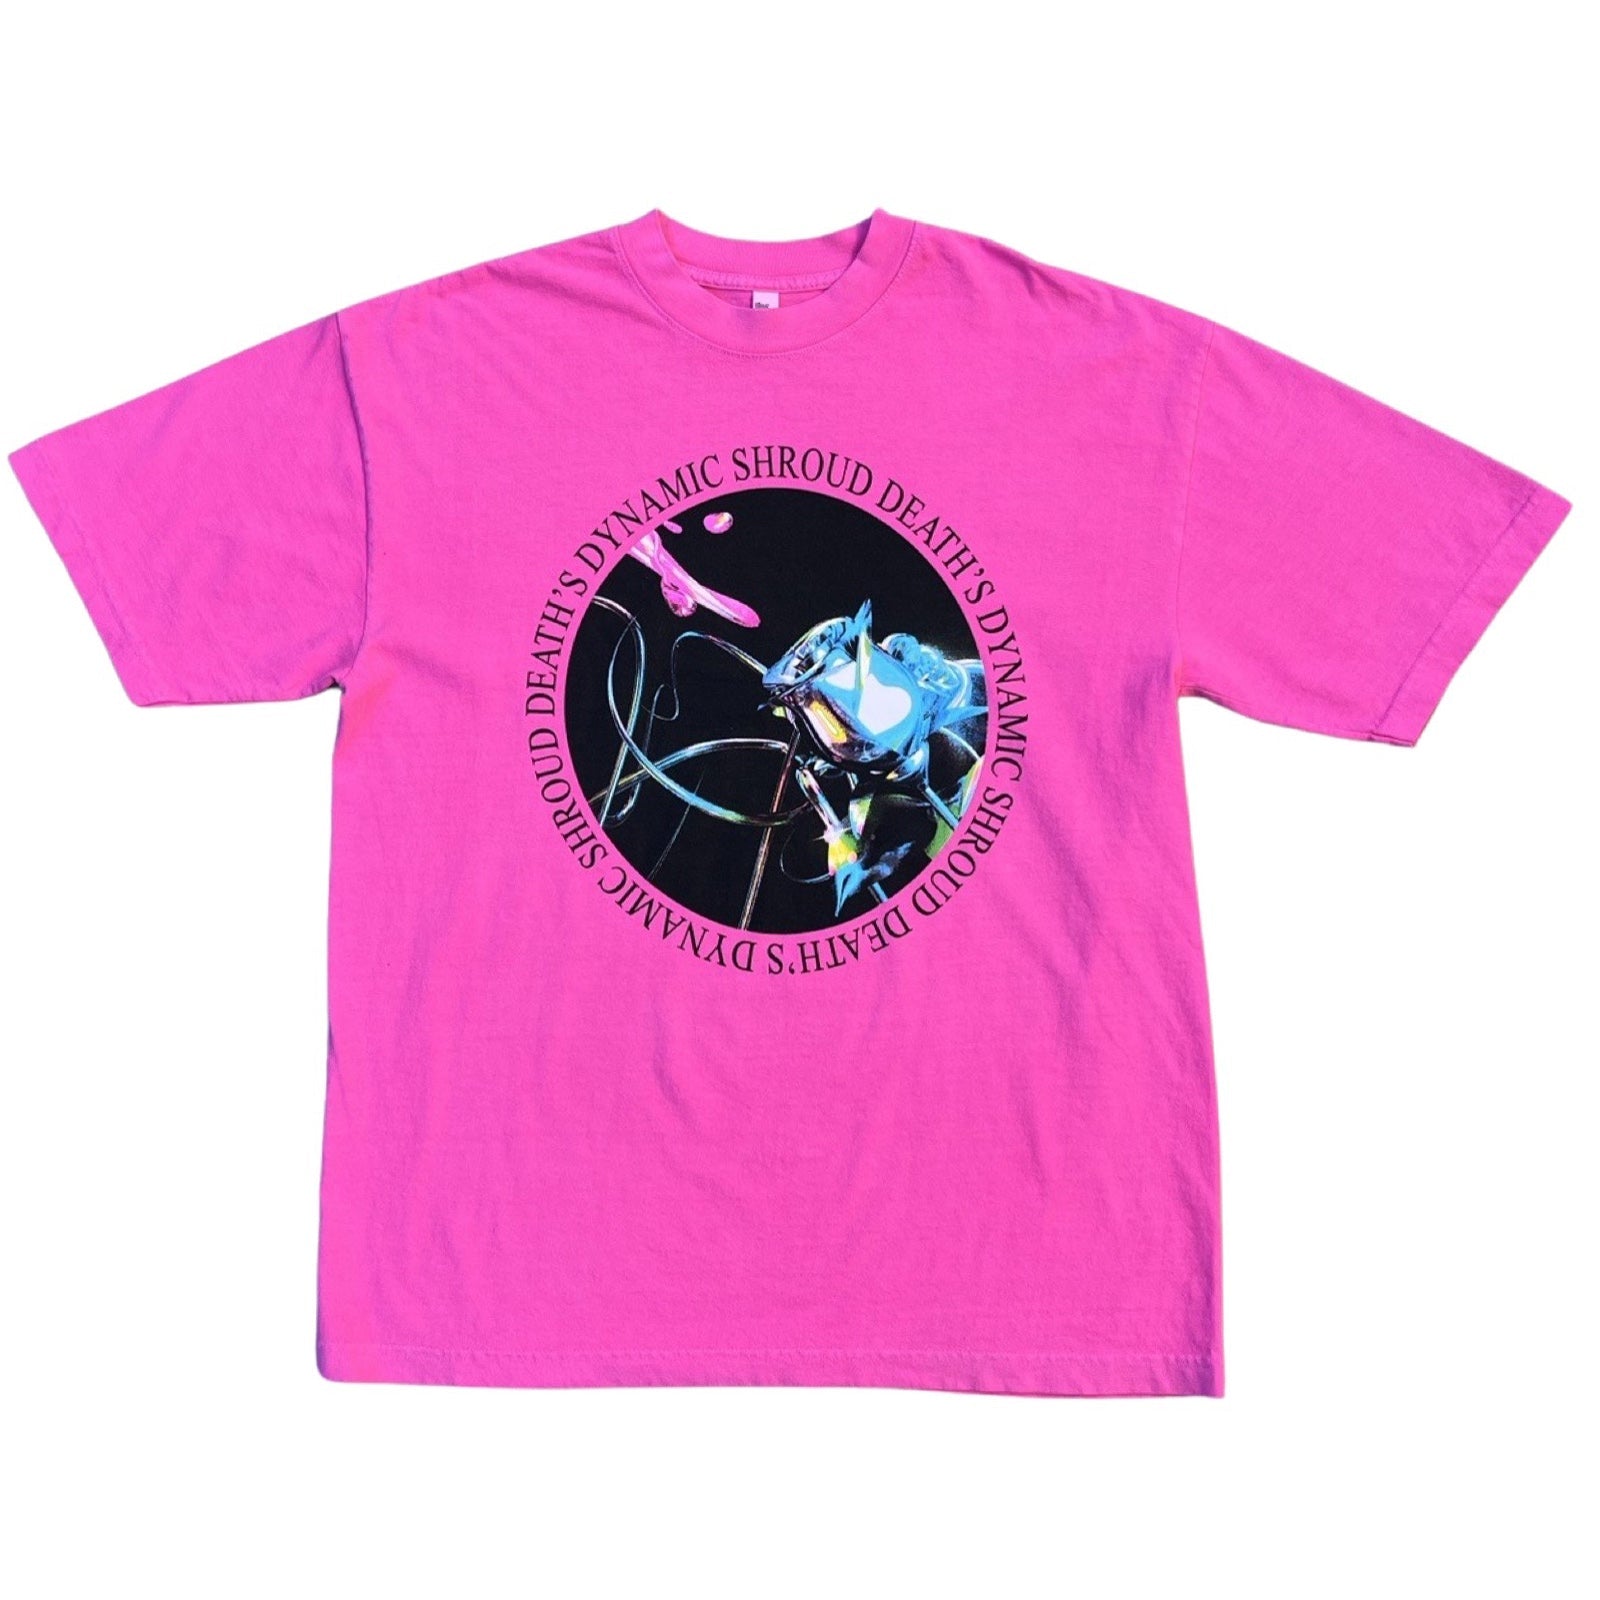 death's dynamic shroud - Pink Tour T-Shirt - 100% Electronica Official Store (Photo 1)